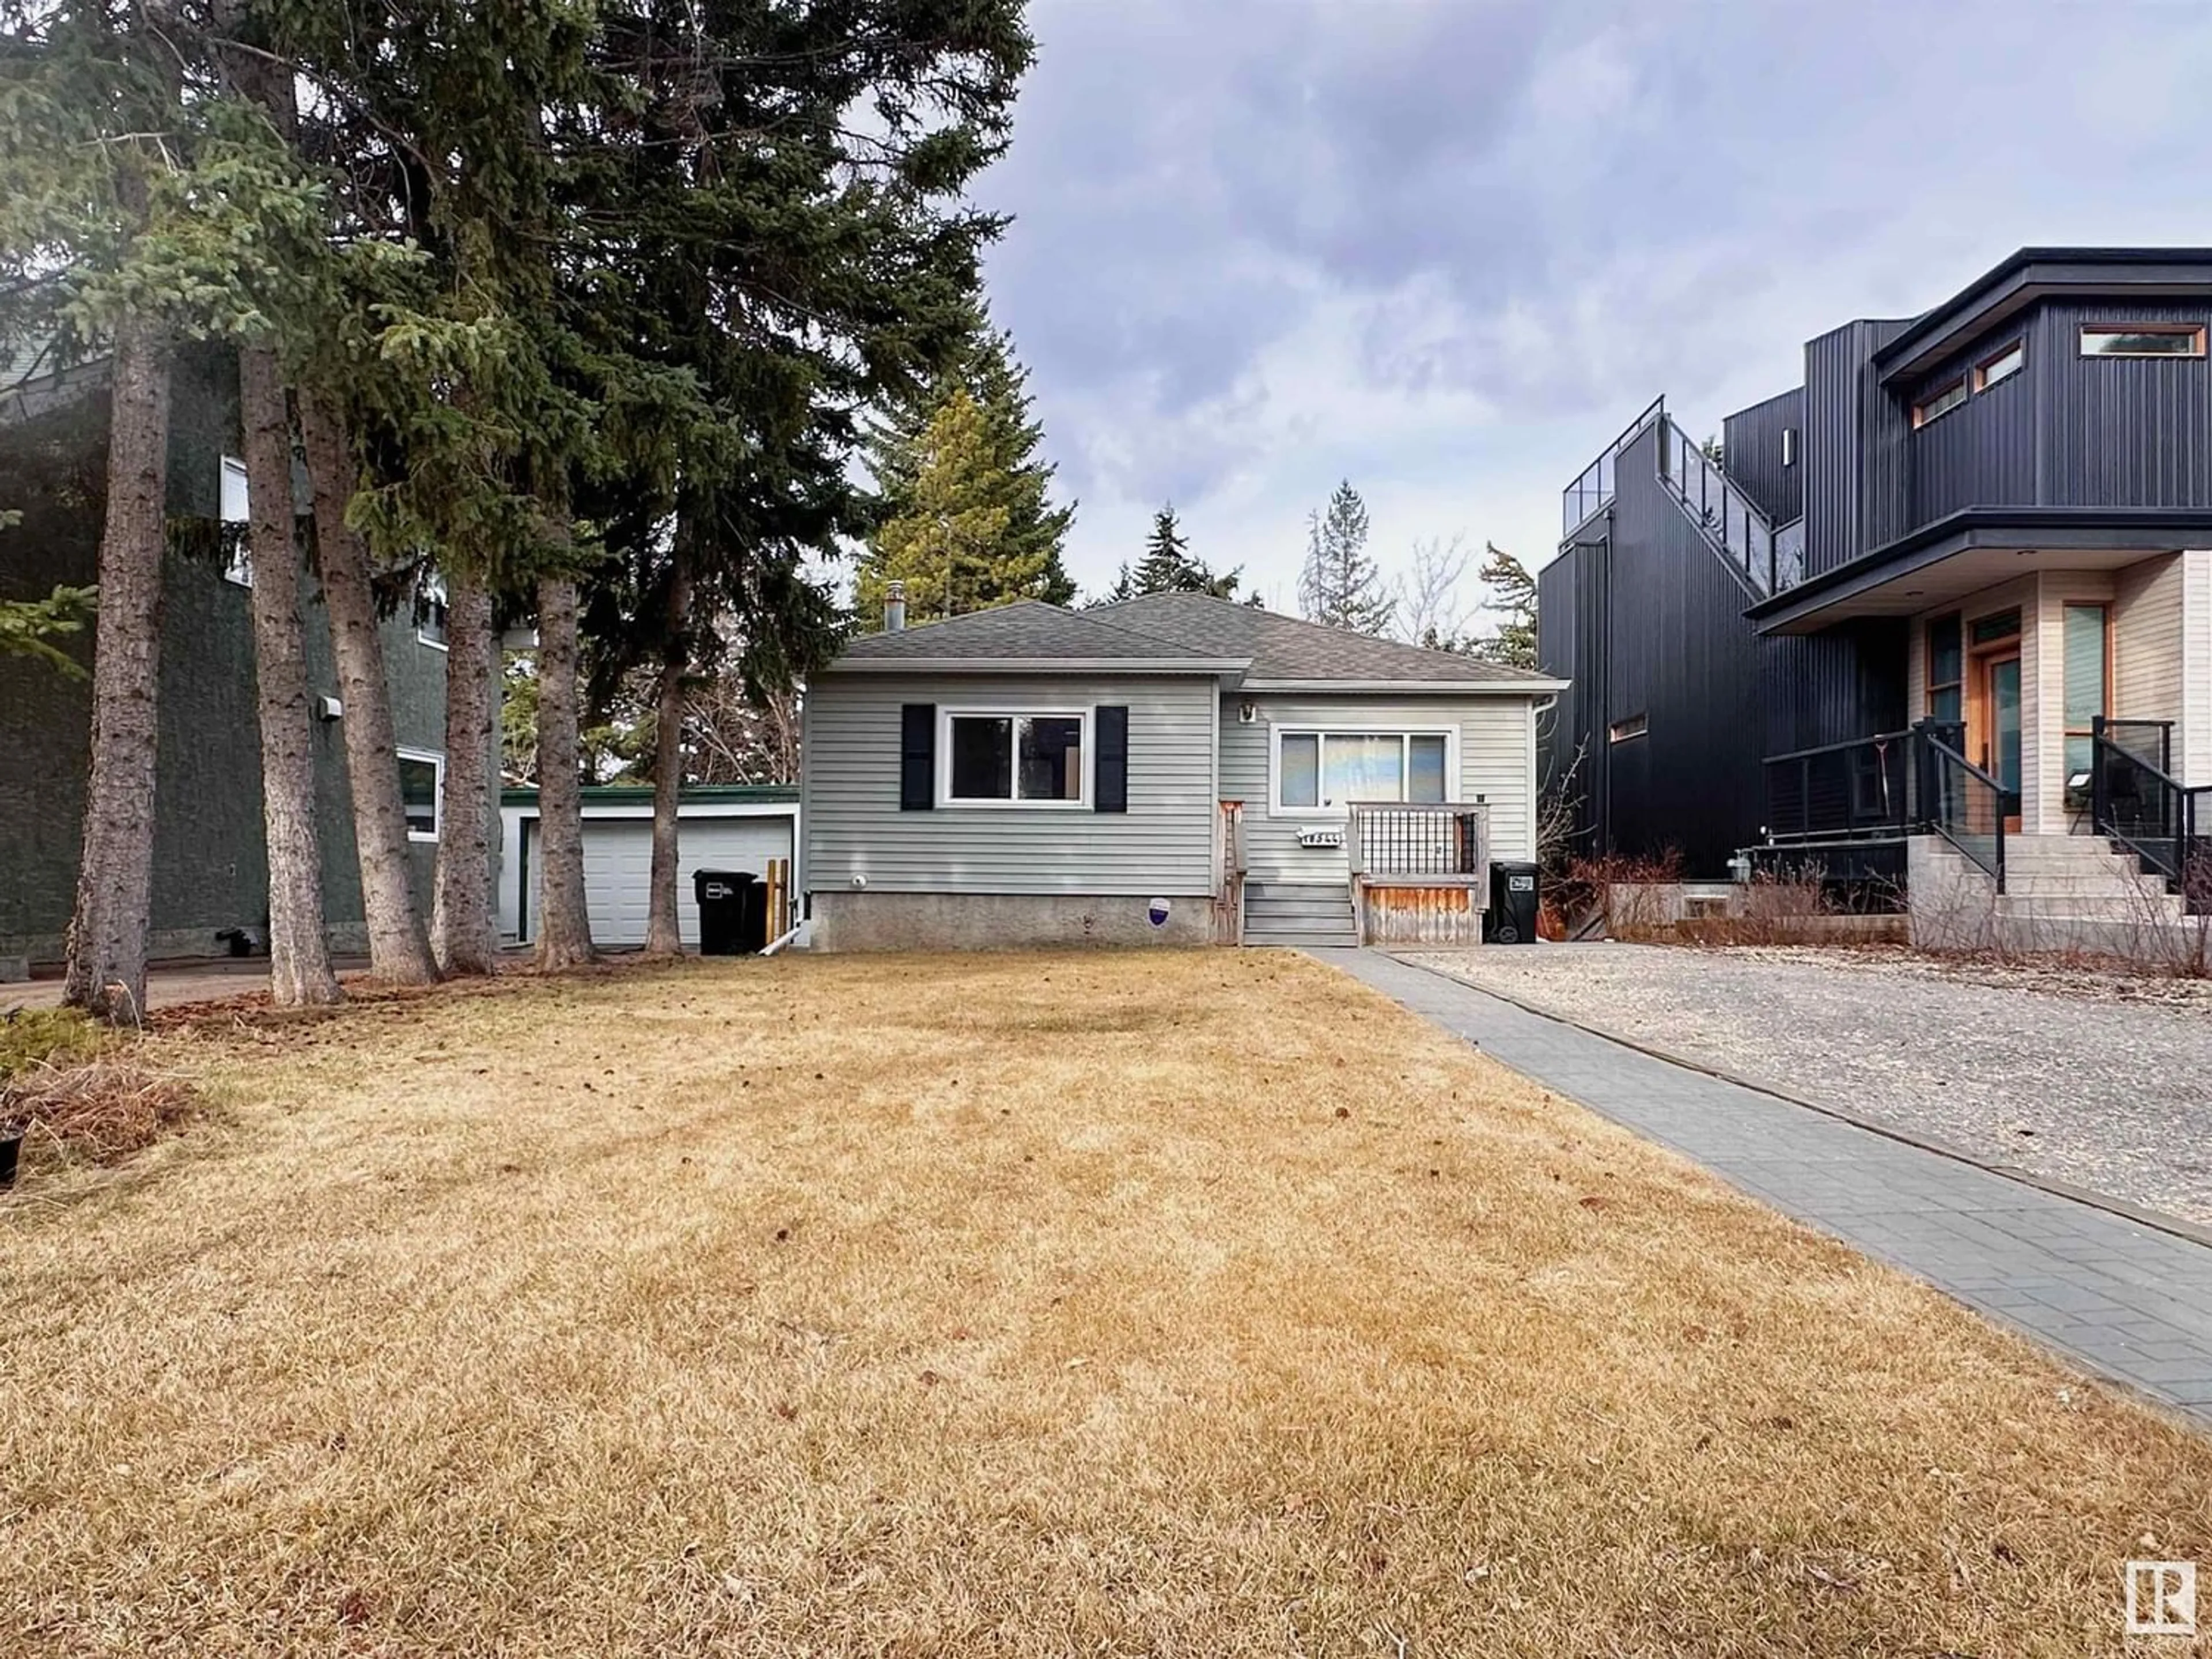 A pic from exterior of the house or condo for 10544 130 ST NW, Edmonton Alberta T5N1X8